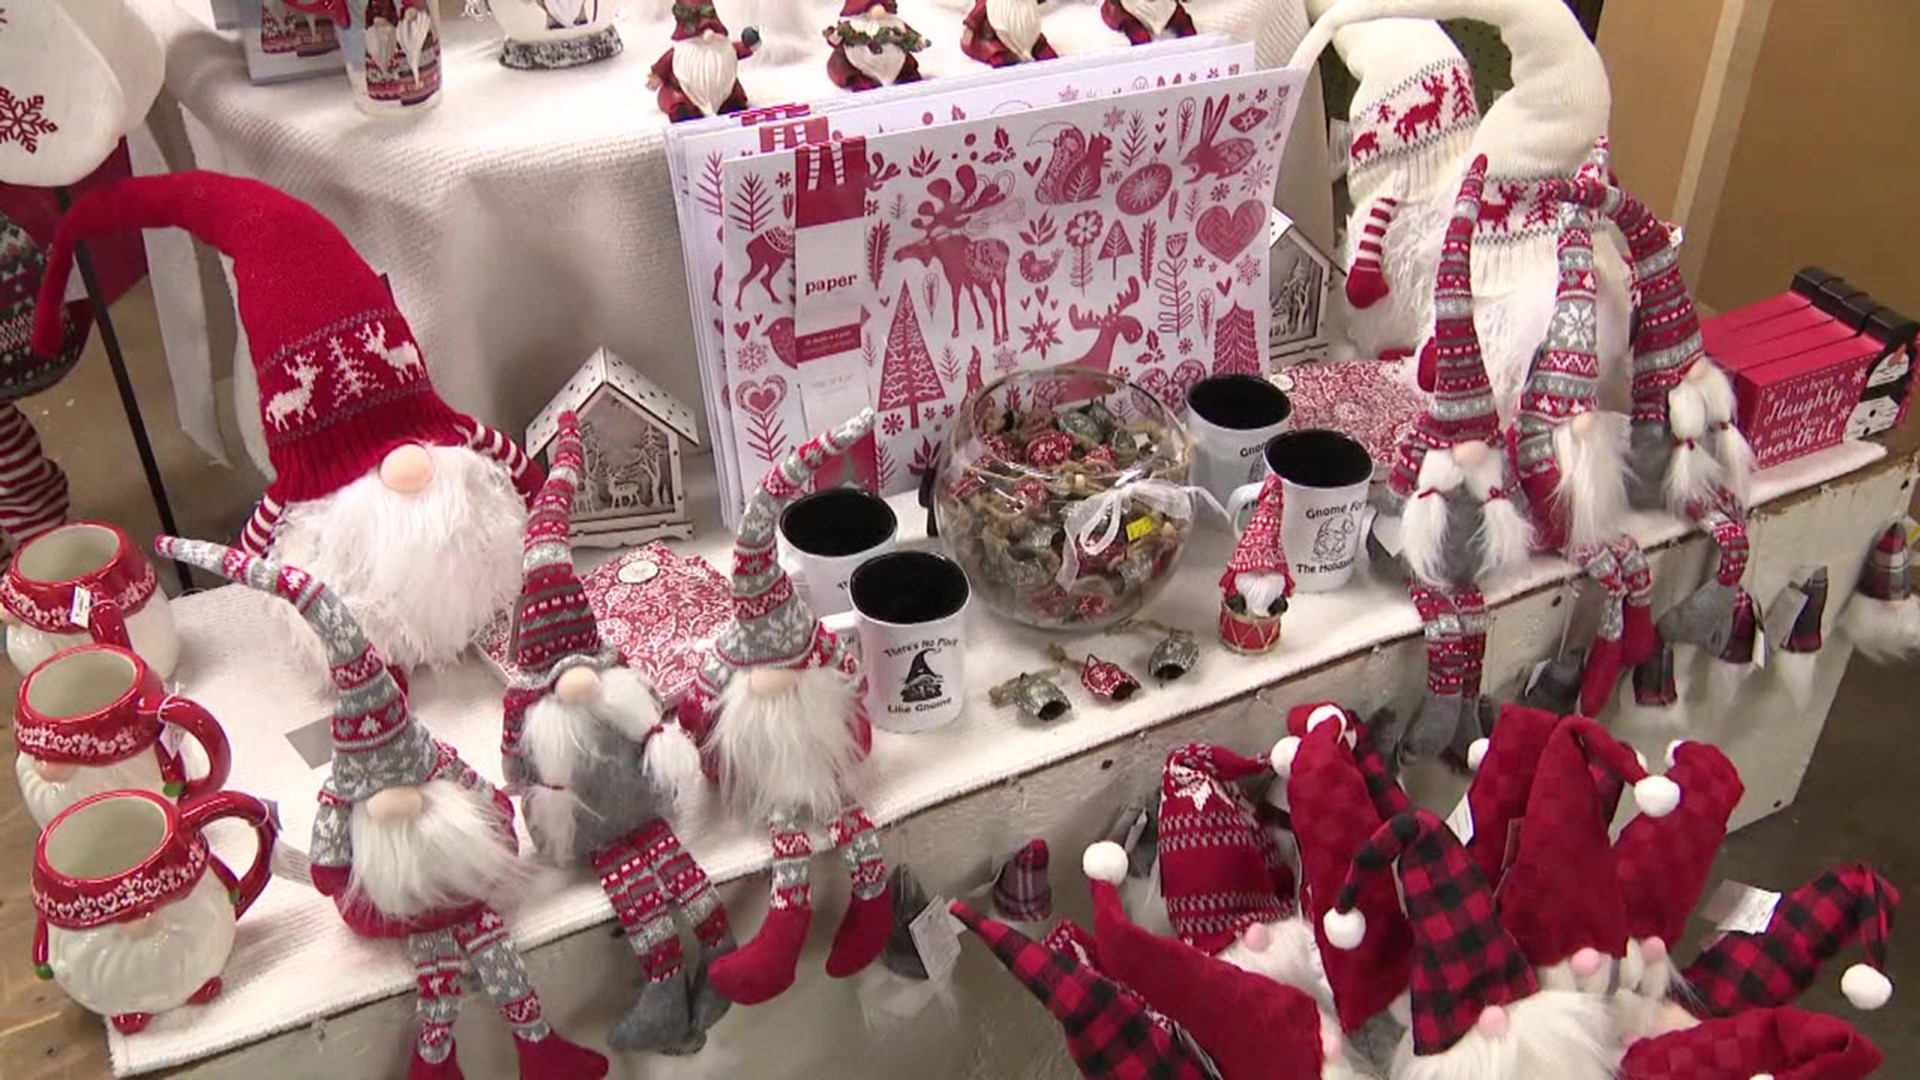 Newswatch 16's Amanda Eustice spoke with a retailer in the Poconos who says if you're typically a last-minute holiday shopper, you may want to rethink it this year.